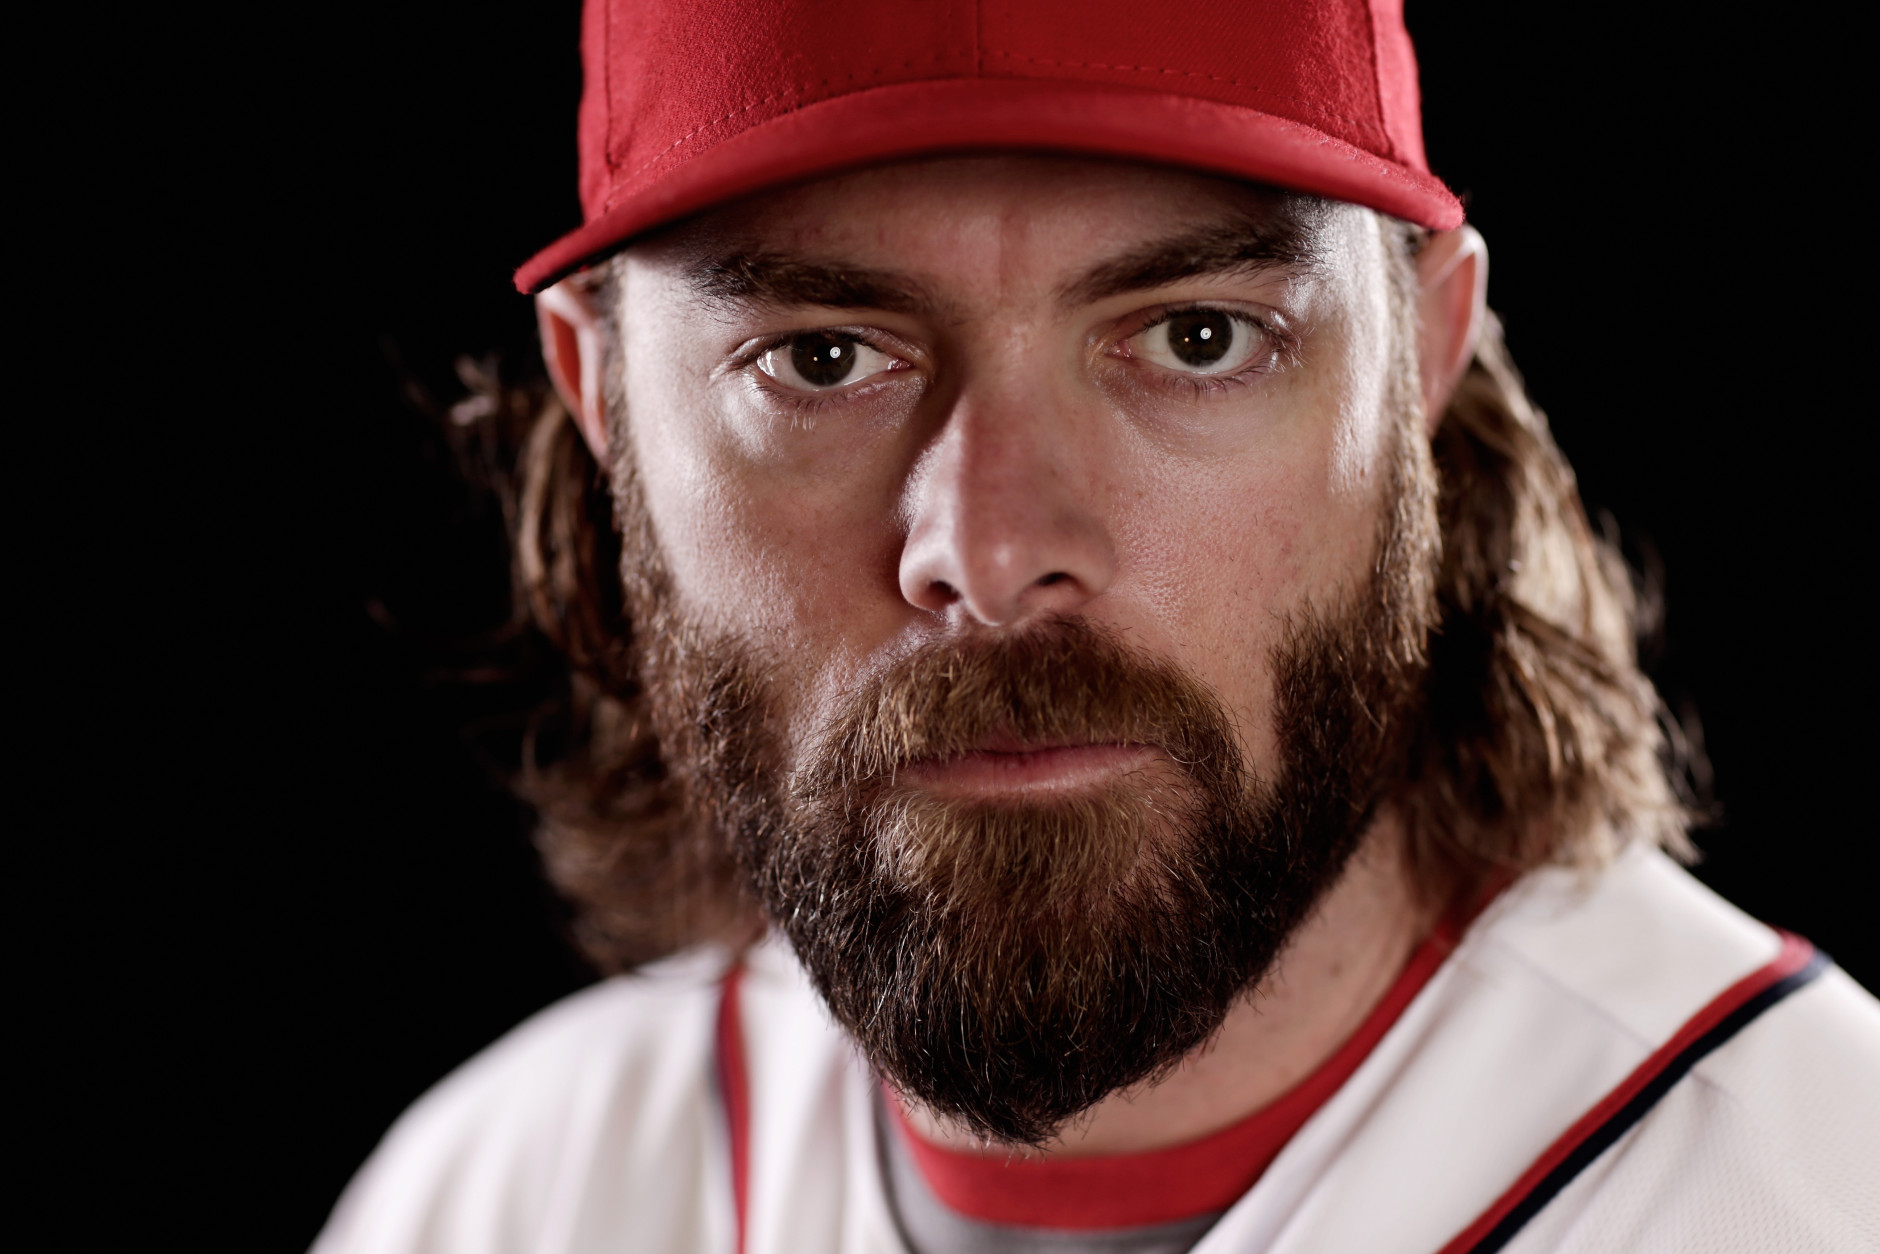 VIERA, FL - MARCH 01:  Jayson Werth #28 of the Washington Nationals Nationals poses for a portrait during photo day at Space Coast Stadium on March 1, 2015 in Viera, Florida.  (Photo by Chris Trotman/Getty Images)